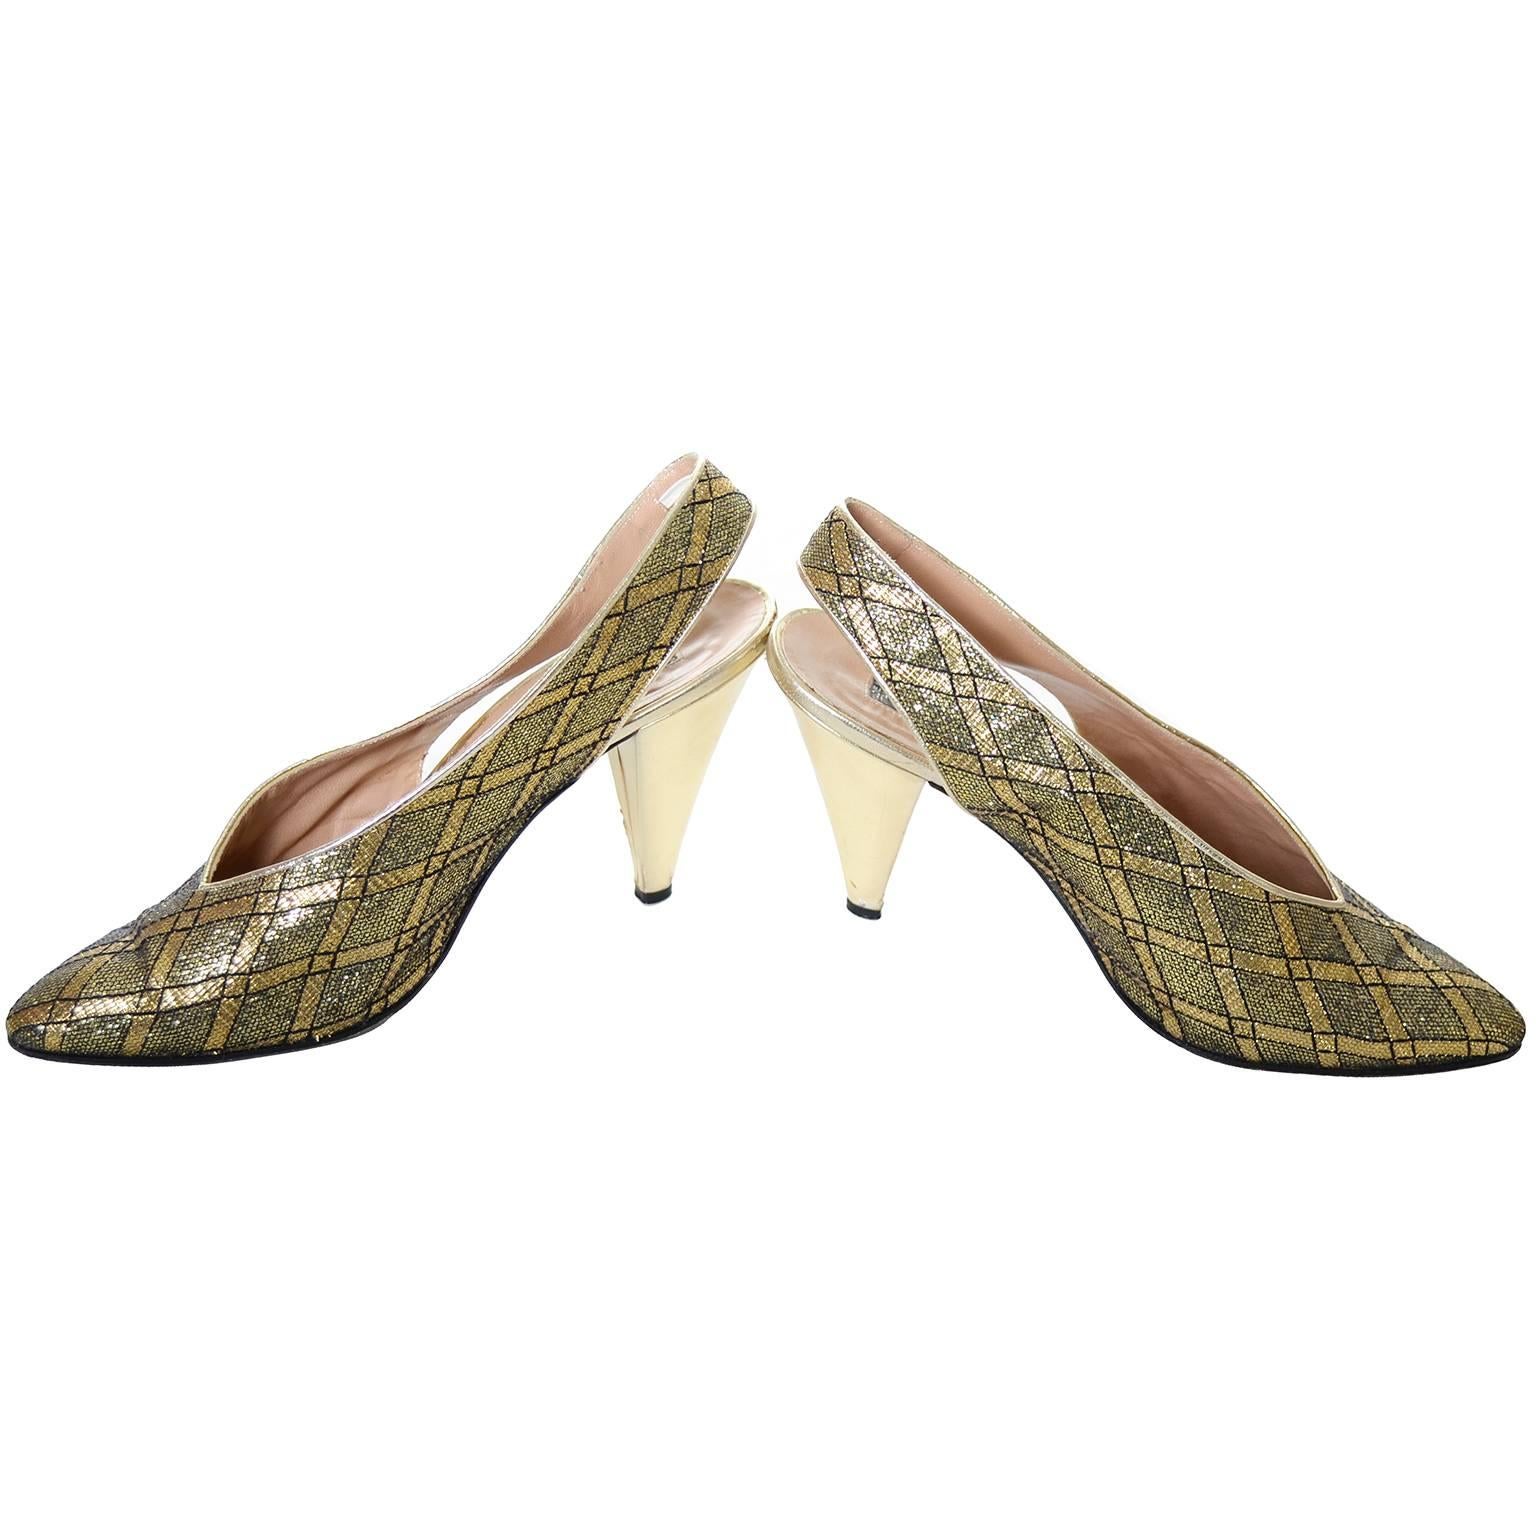 These slingback vintage Maud Frizon shoes came from an estate of beautiful vintage clothing and accessories from the 1970's, 80's and 90's. These shoes are in excellent condition with only minor sole scuffs and are labeled a Italian size 38 or a US